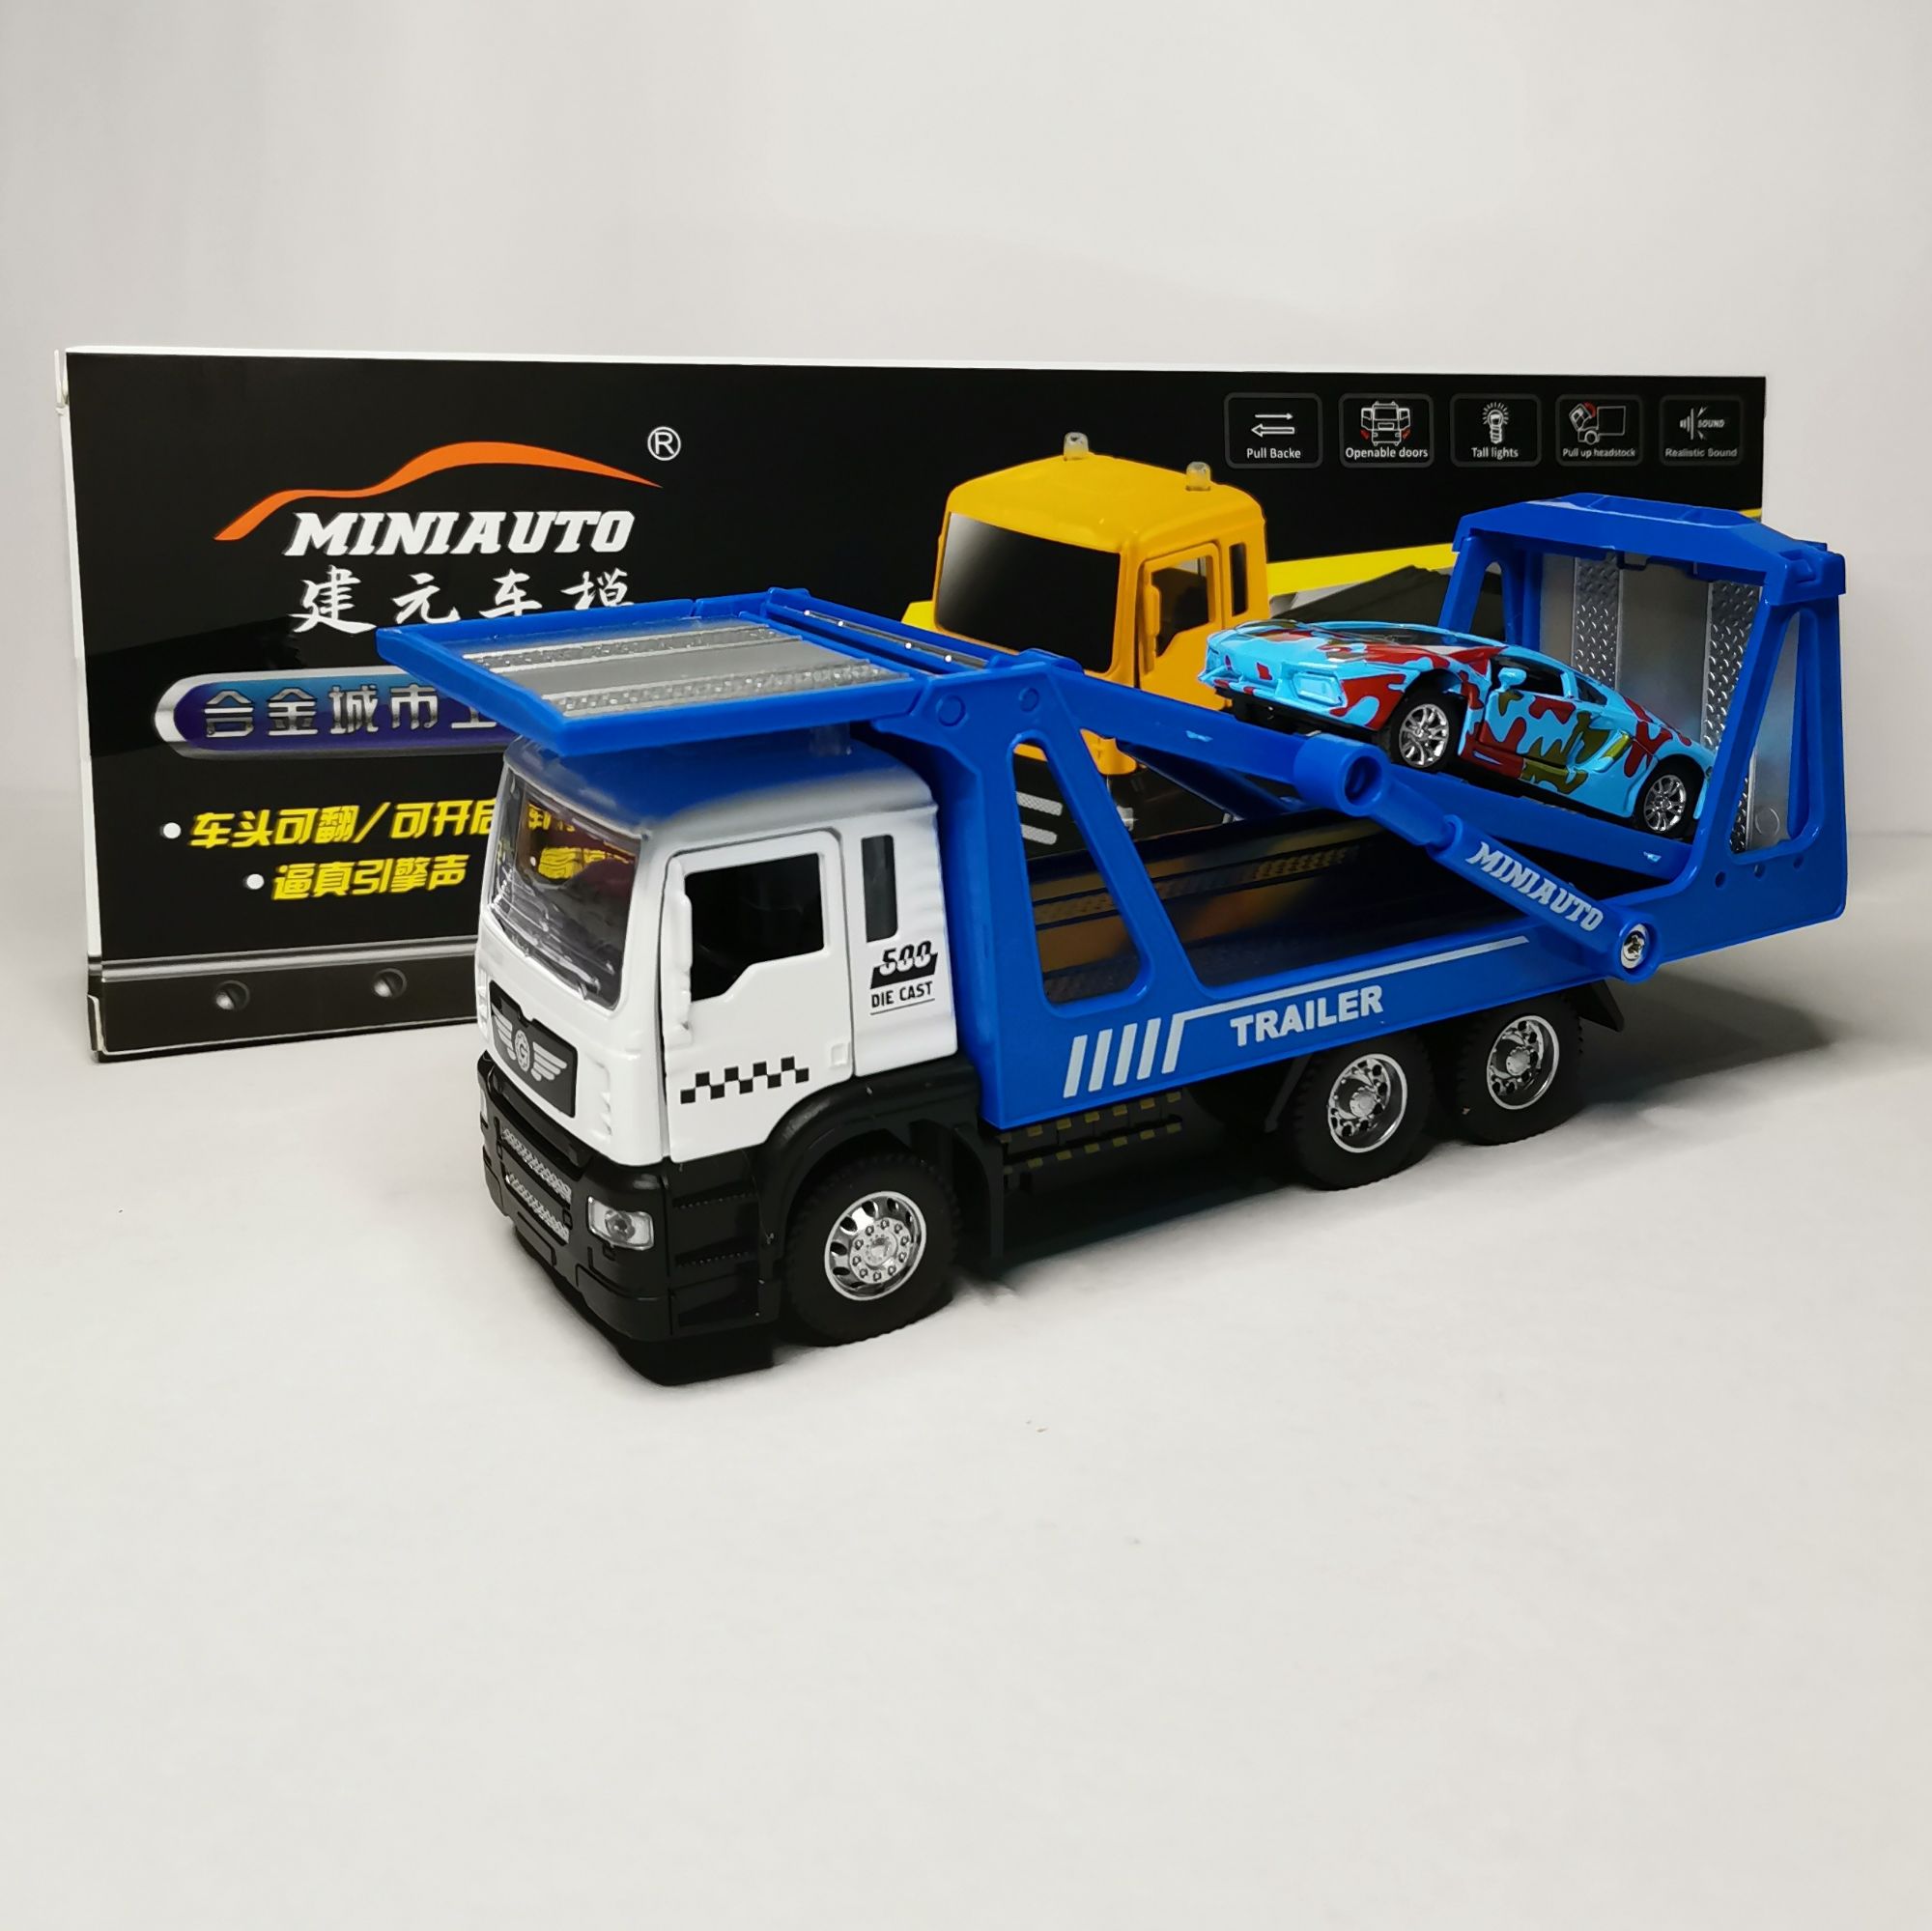 diecast truck and trailers